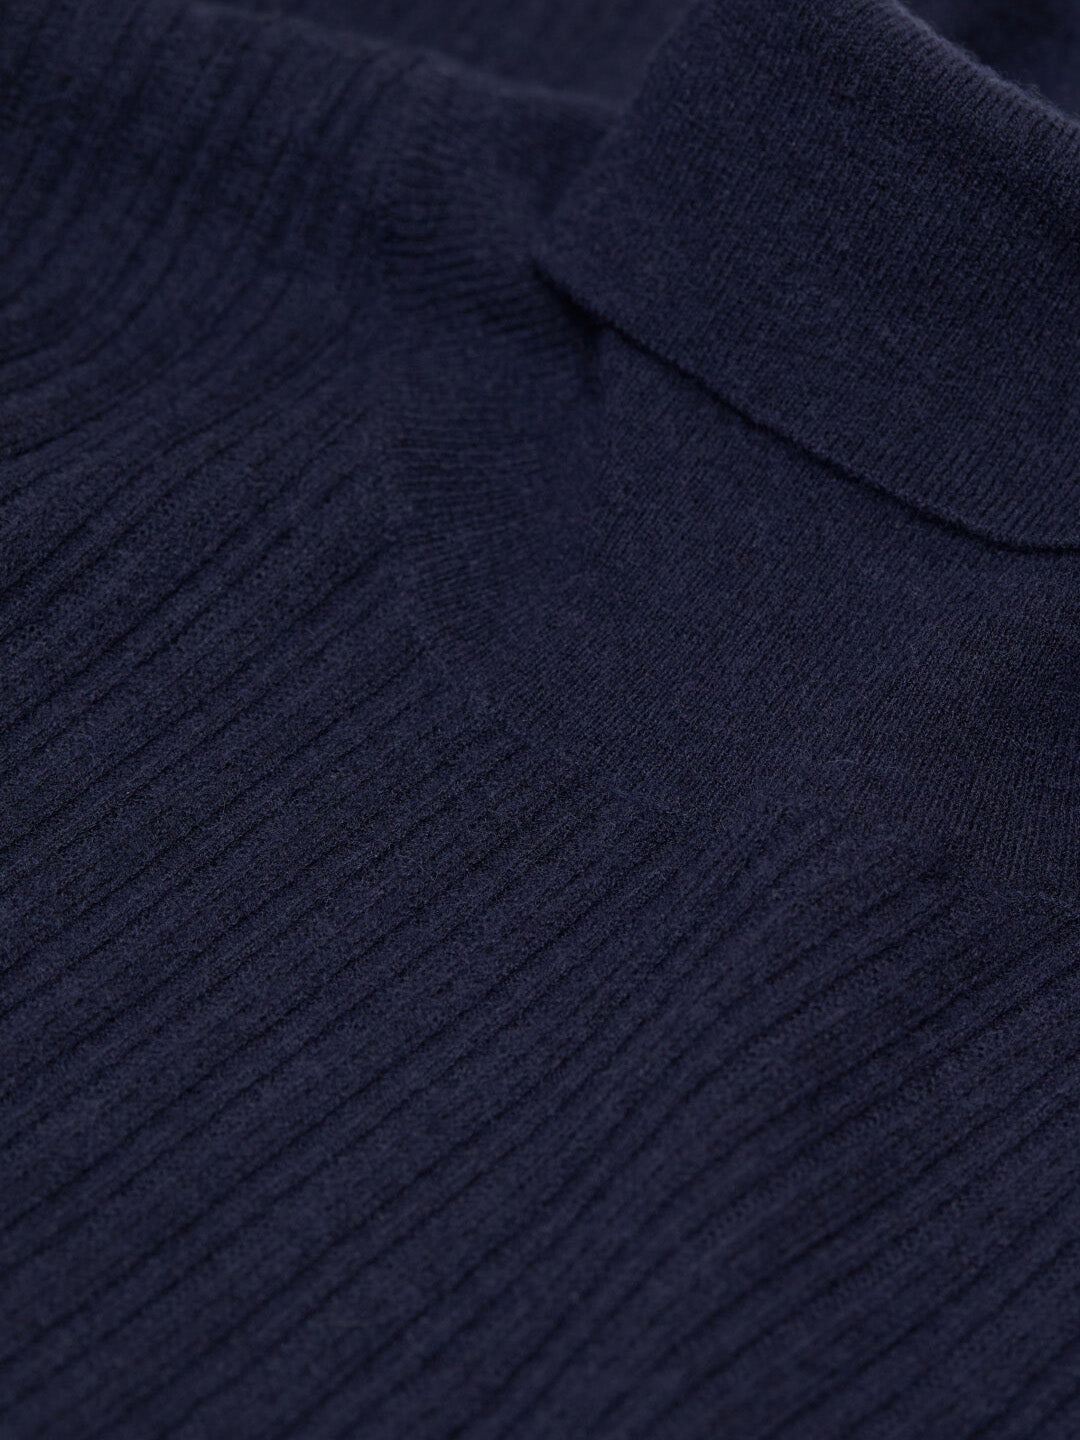 Longsleeve with Cashmere in Dark Night